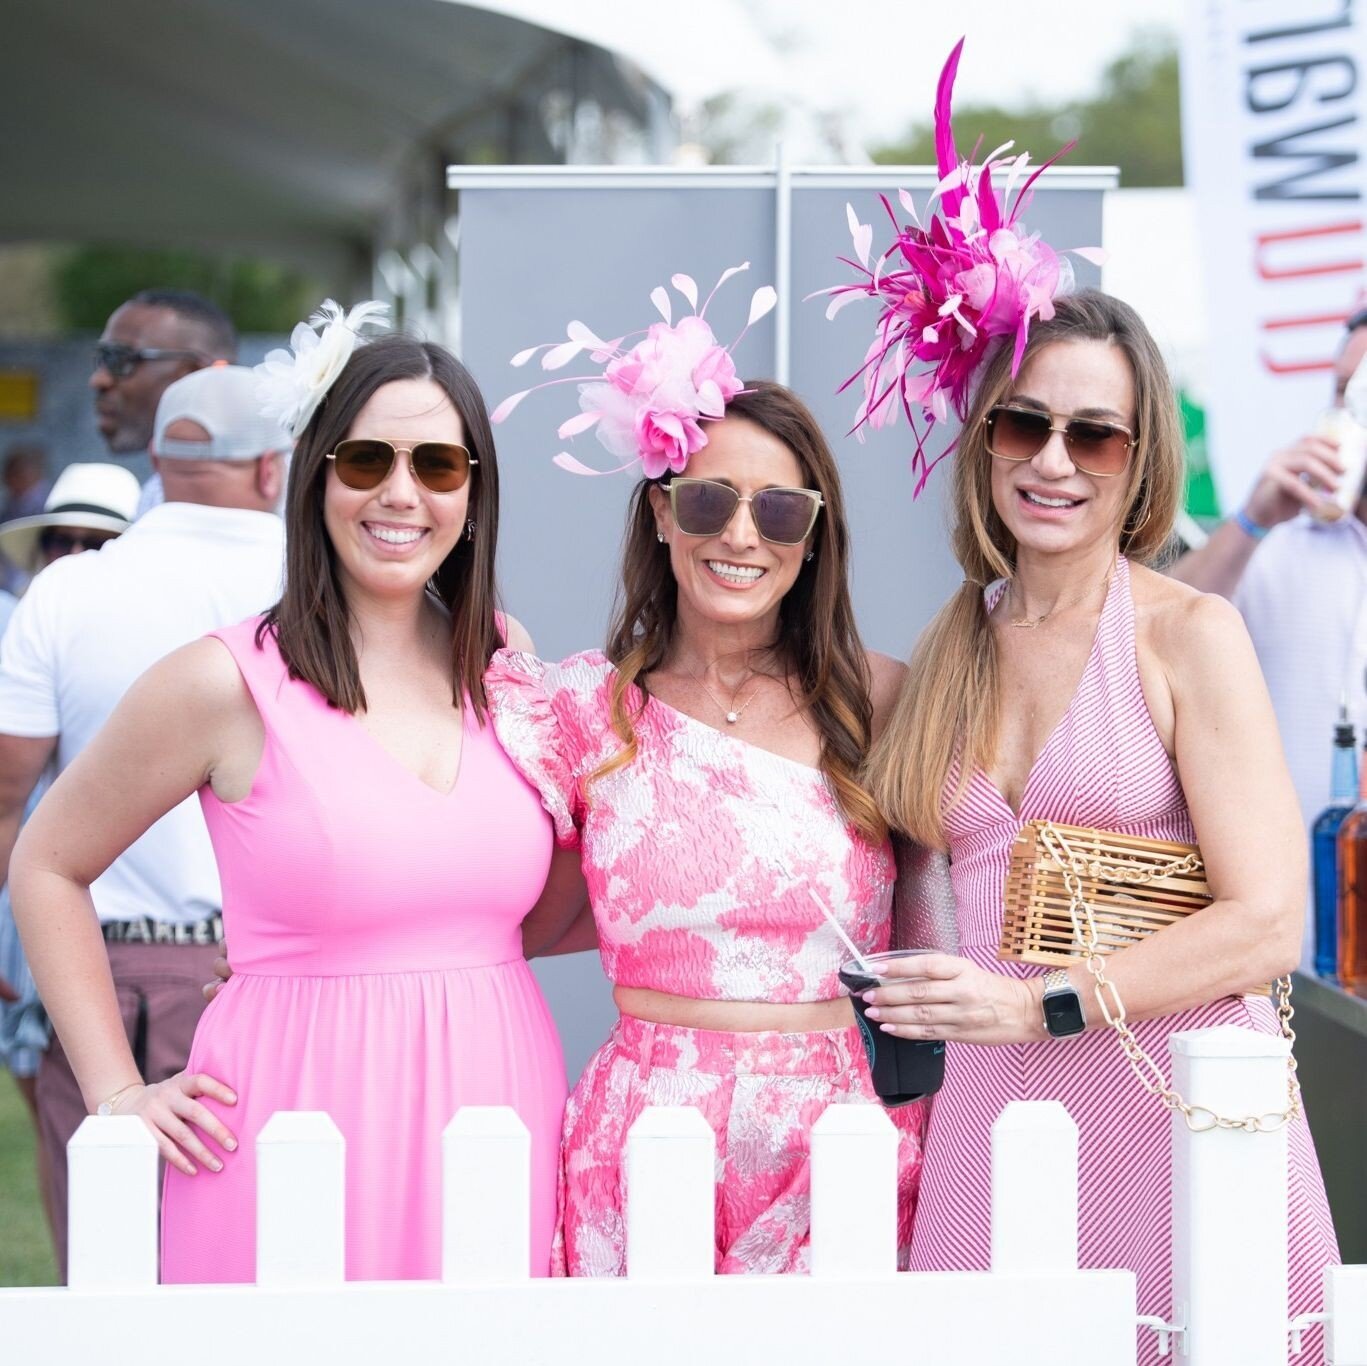 Put on your flashy party hat and best brightly colored dress for the 12th Annual @morganautogroup Charity Polo Classic presented by @coxautomotive this Saturday!⁠
⁠
👒 Who will be named this year's 𝐁𝐞𝐬𝐭 𝐃𝐫𝐞𝐬𝐬𝐞𝐝 𝐋𝐚𝐝𝐲, sponsored by @have